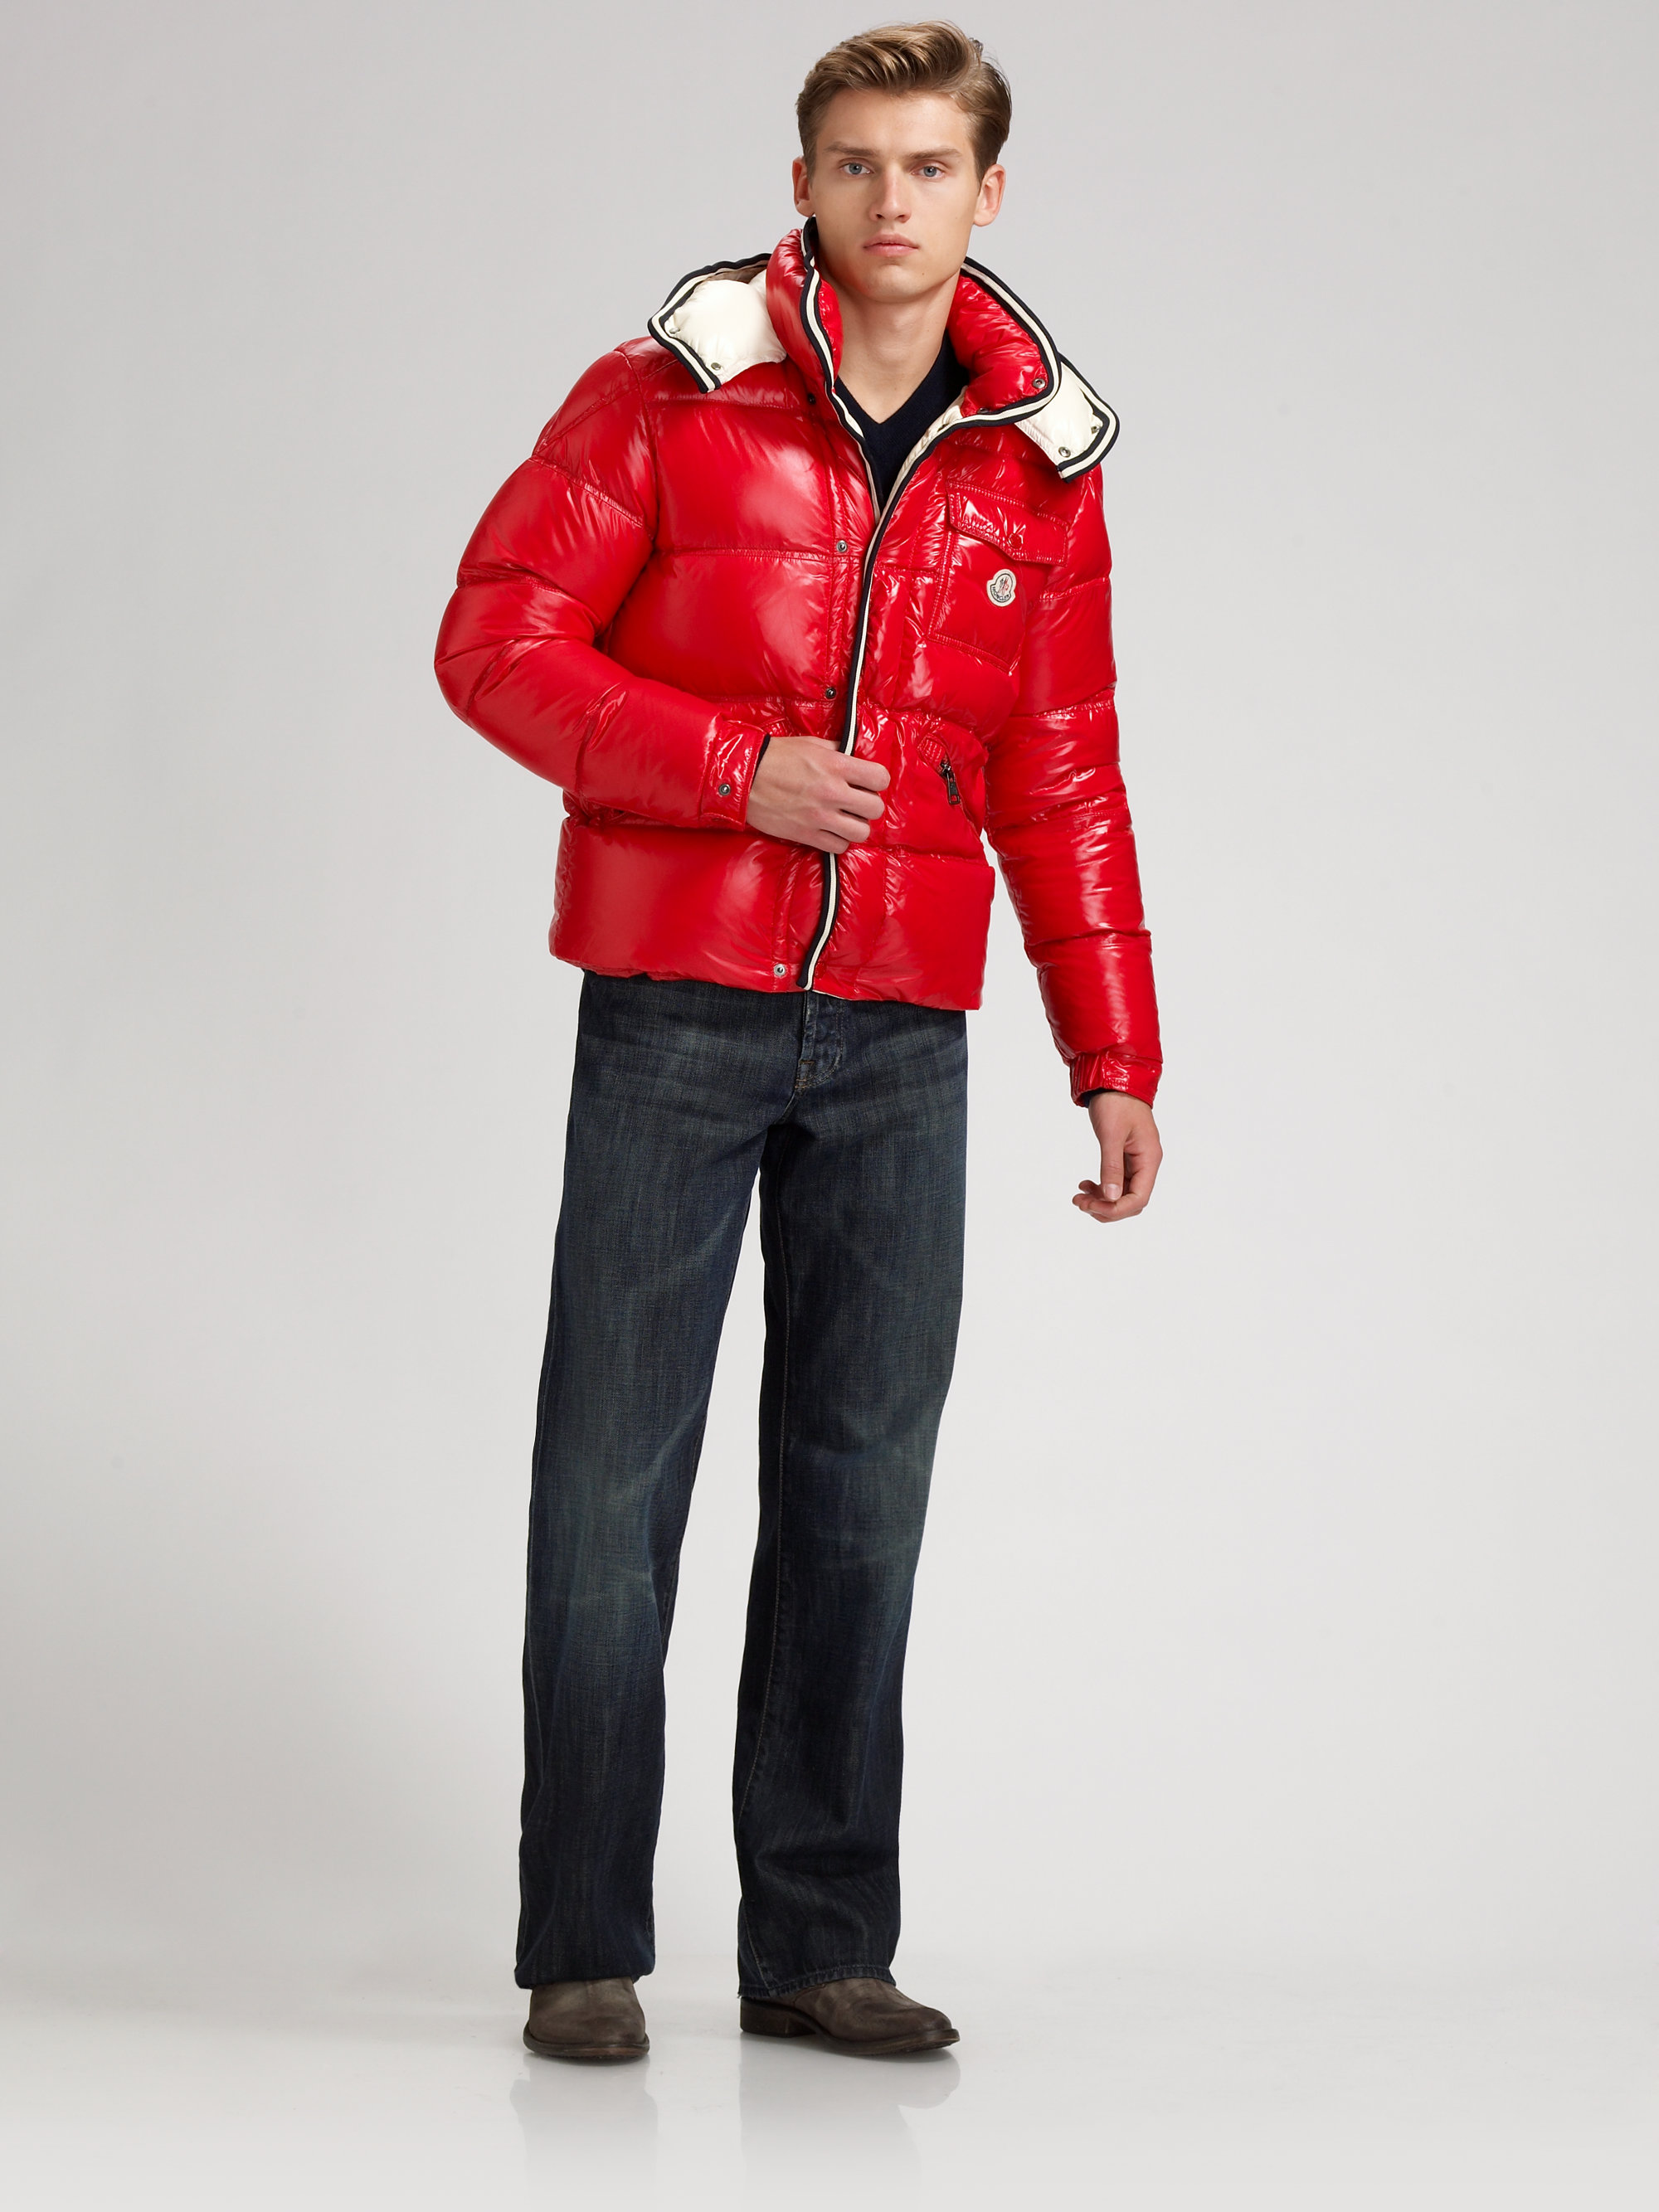 Moncler Branson Down Parka in Red for Men - Lyst